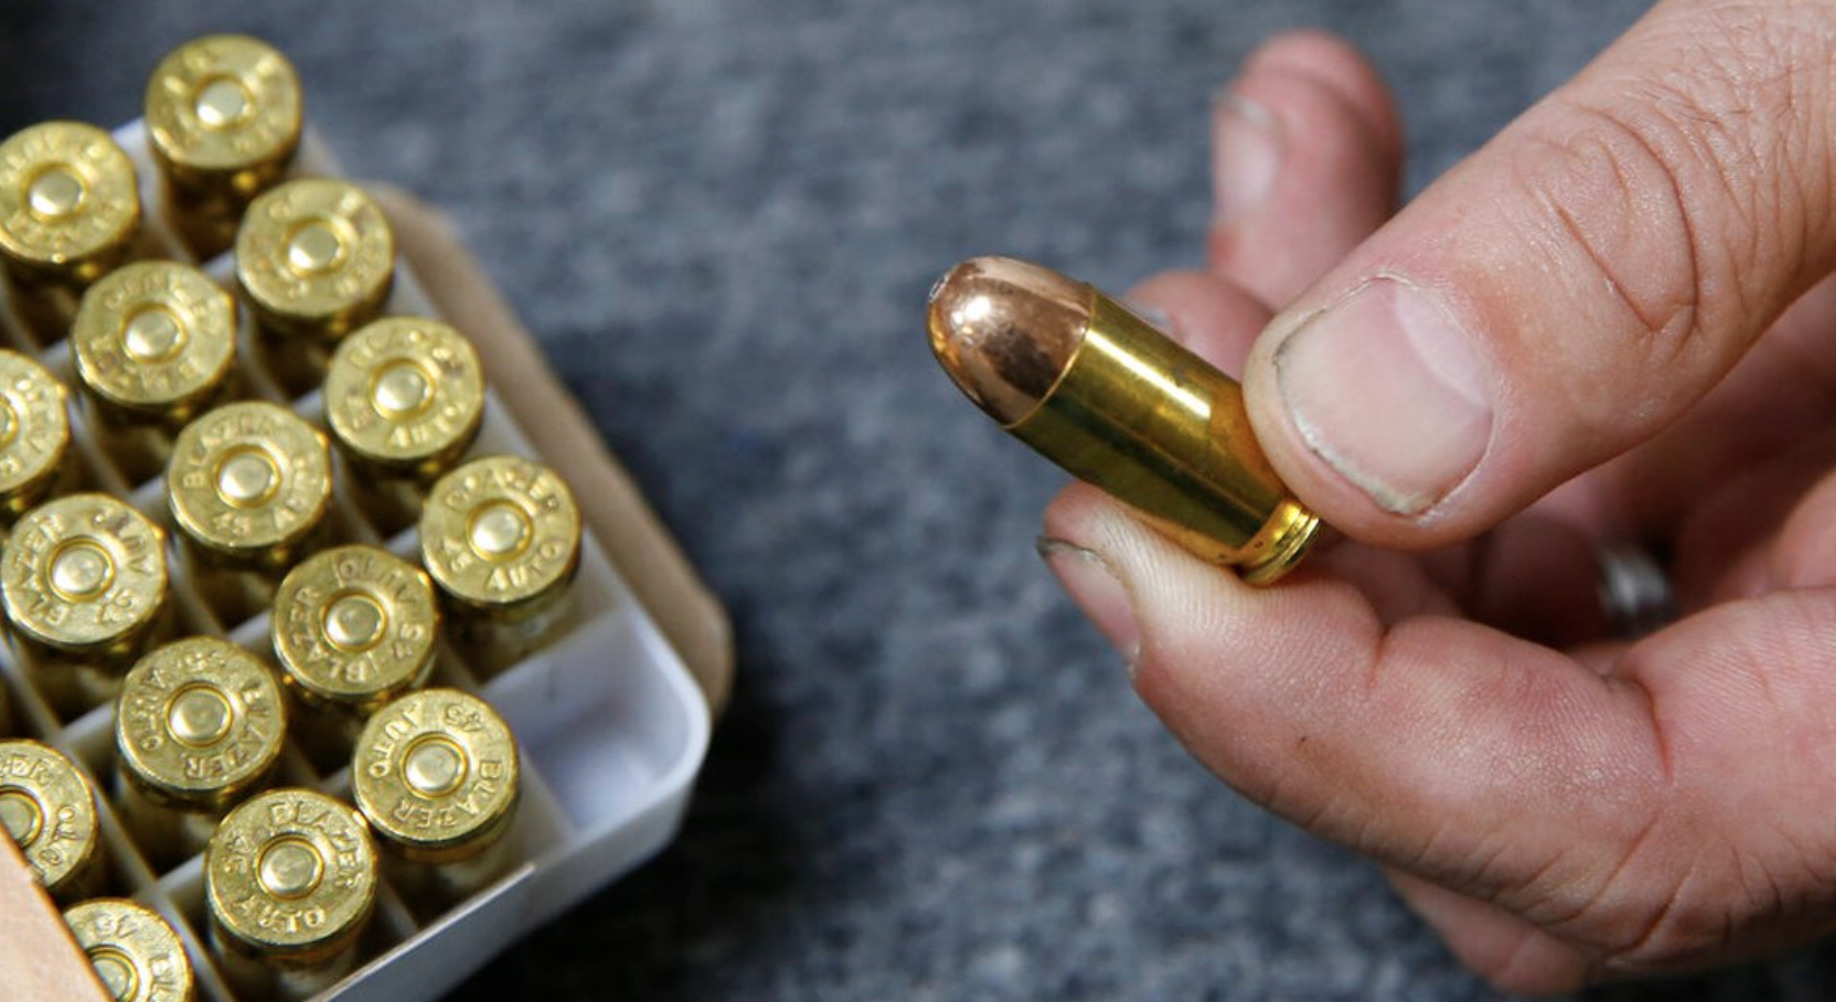 Millions of 9 mm Rounds Stolen 😮  From Shipping 📦 Containers!